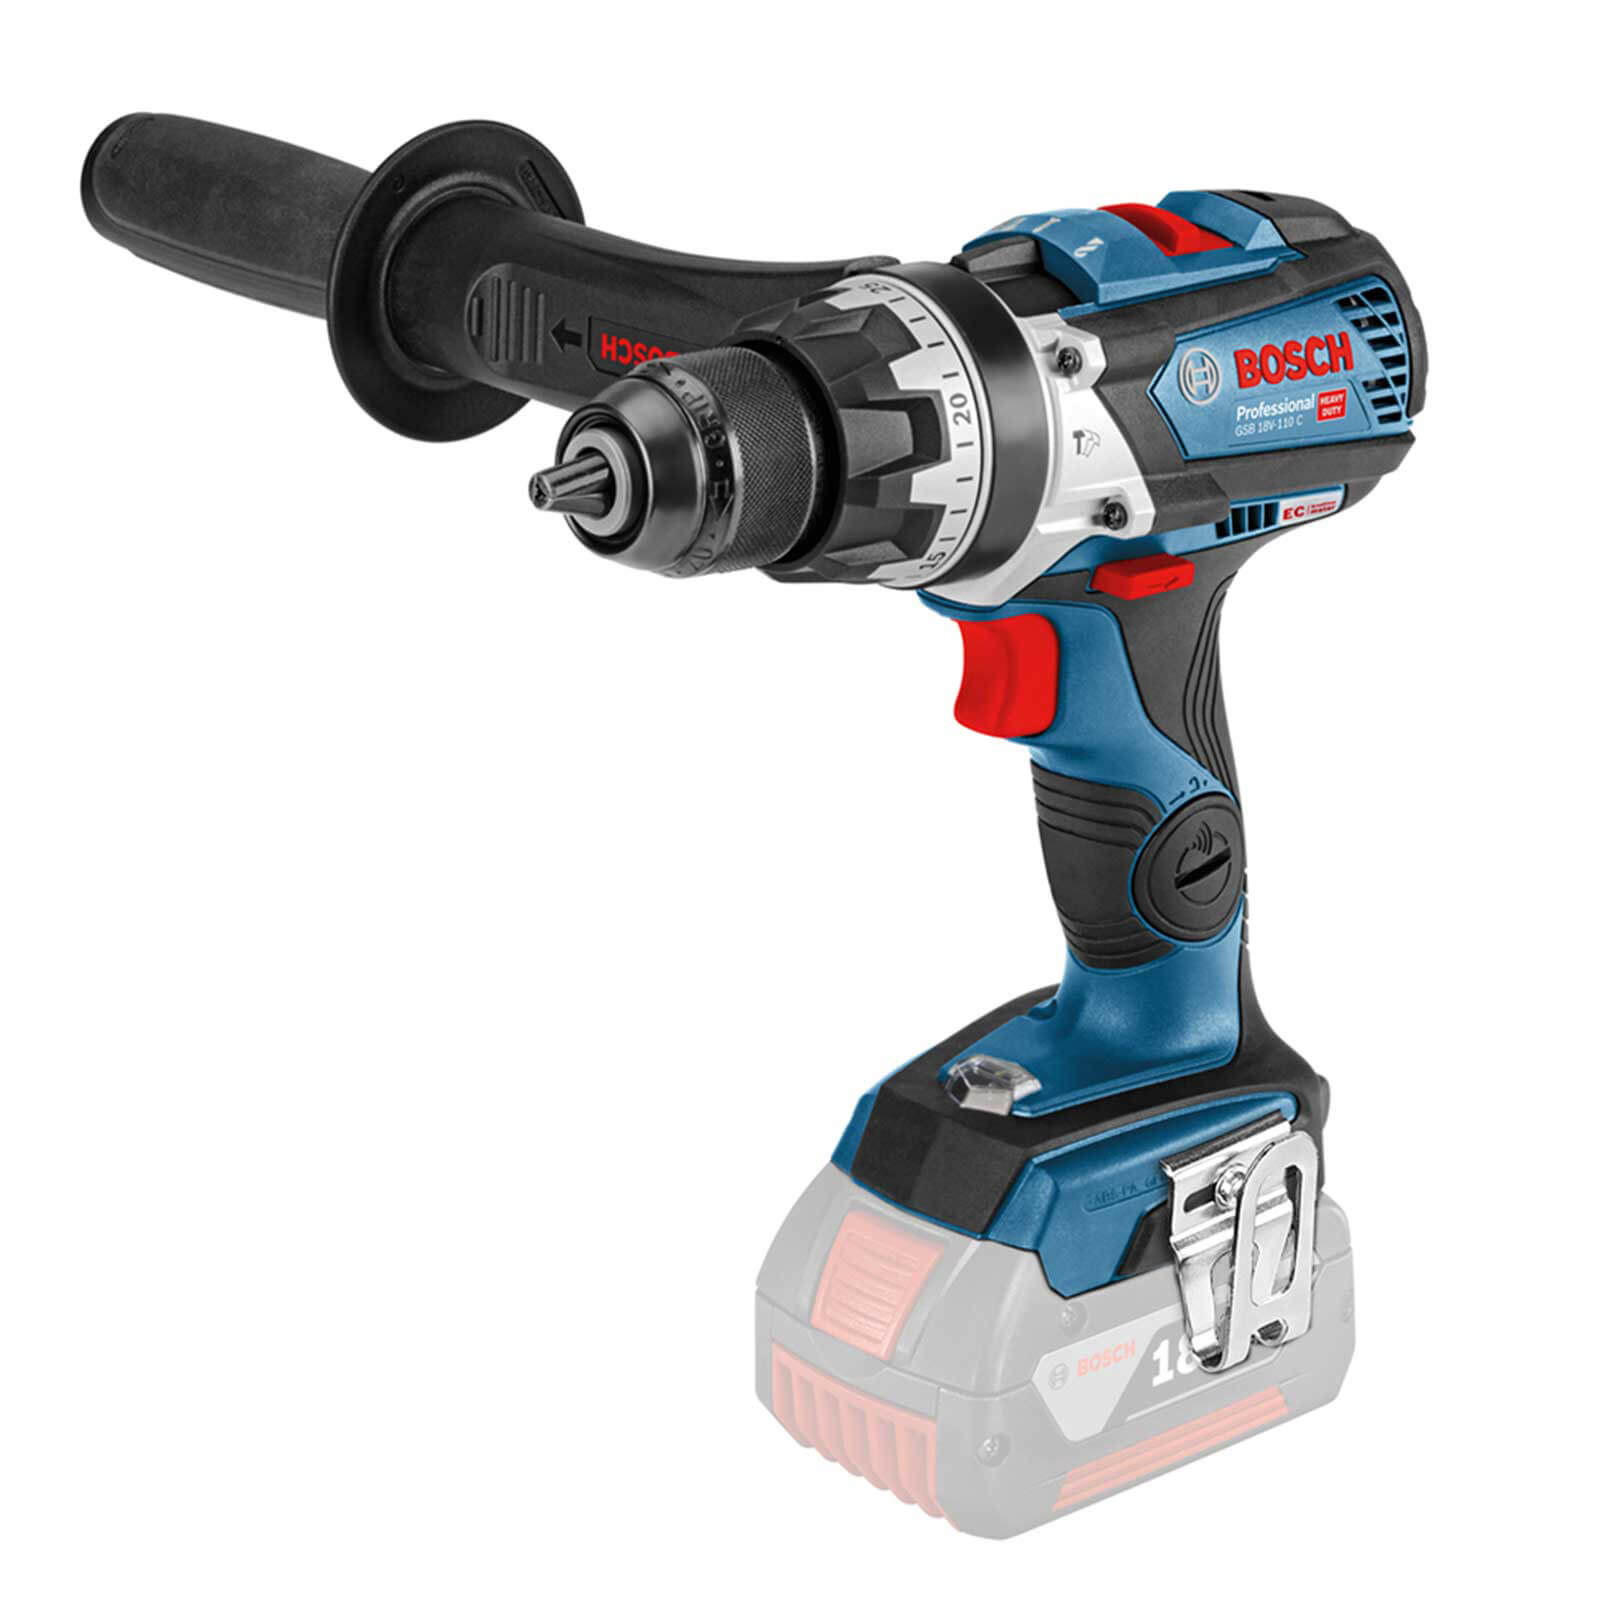 Bosch GSB 18V-110 18v Cordless Brushless Combi Drill Connect Ready No Batteries No Charger No Case